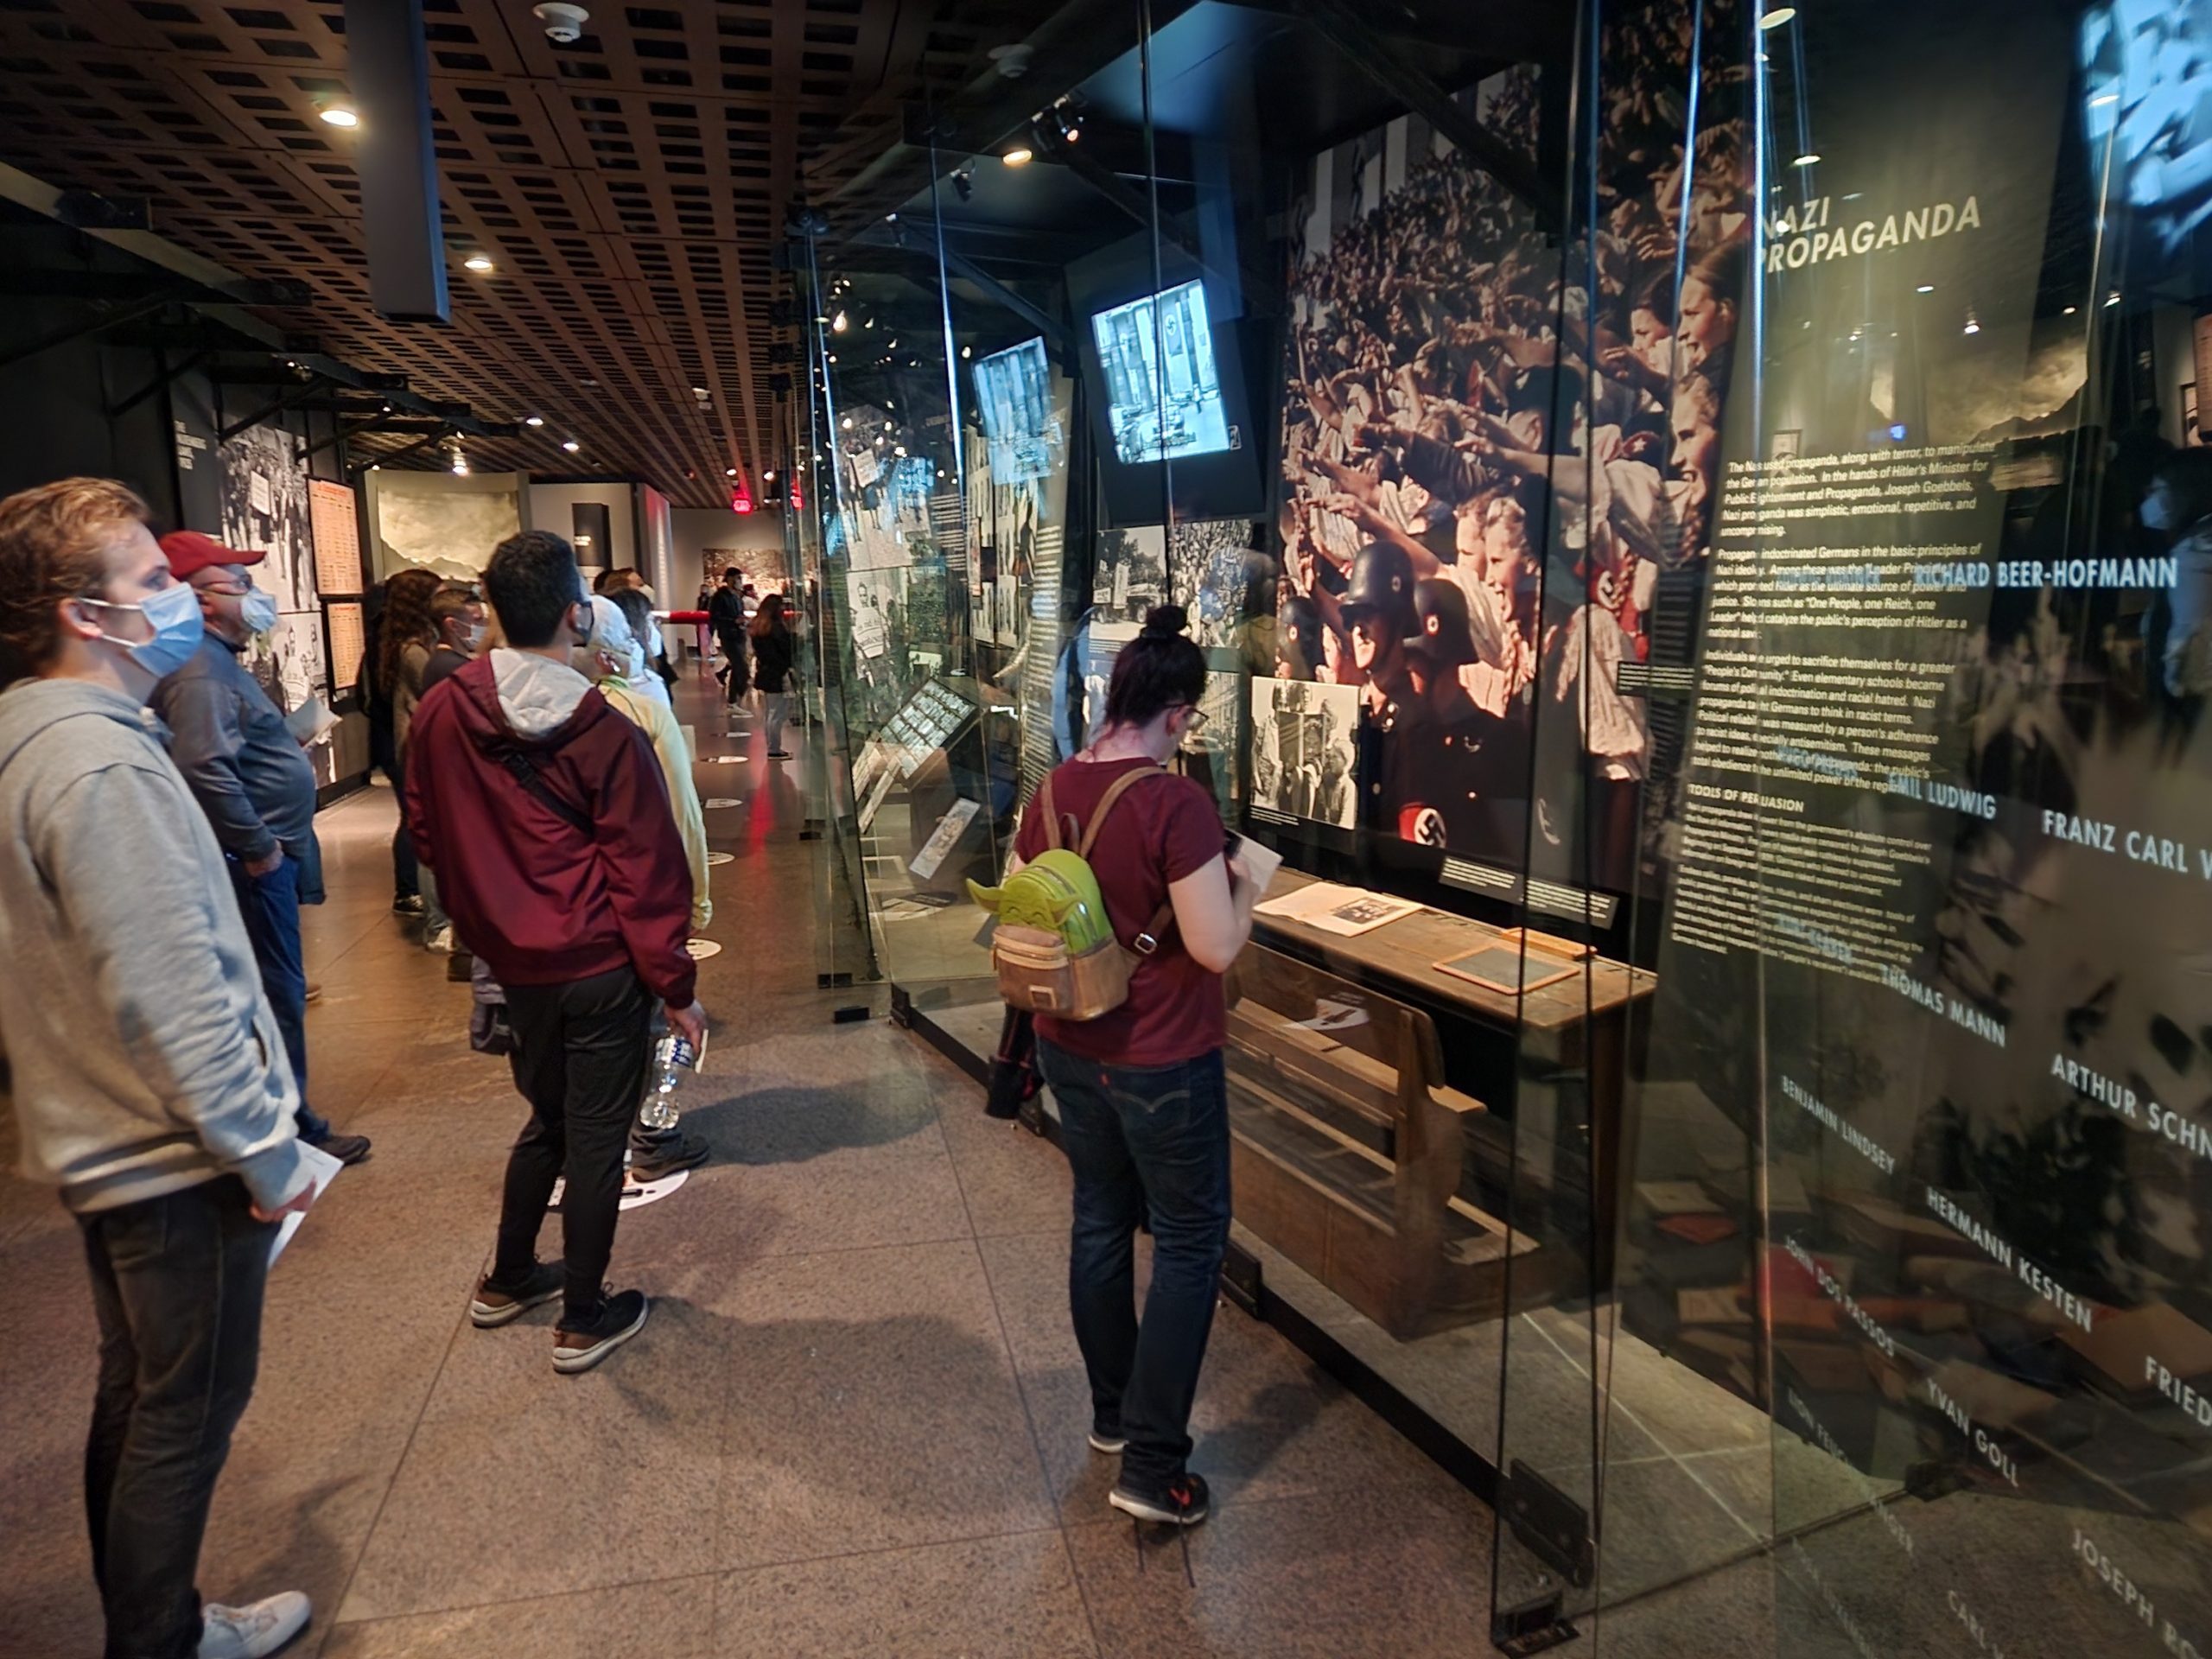 Students view an exhibit on Nazi propaganda at the United States National Holocaust Memorial Museum.